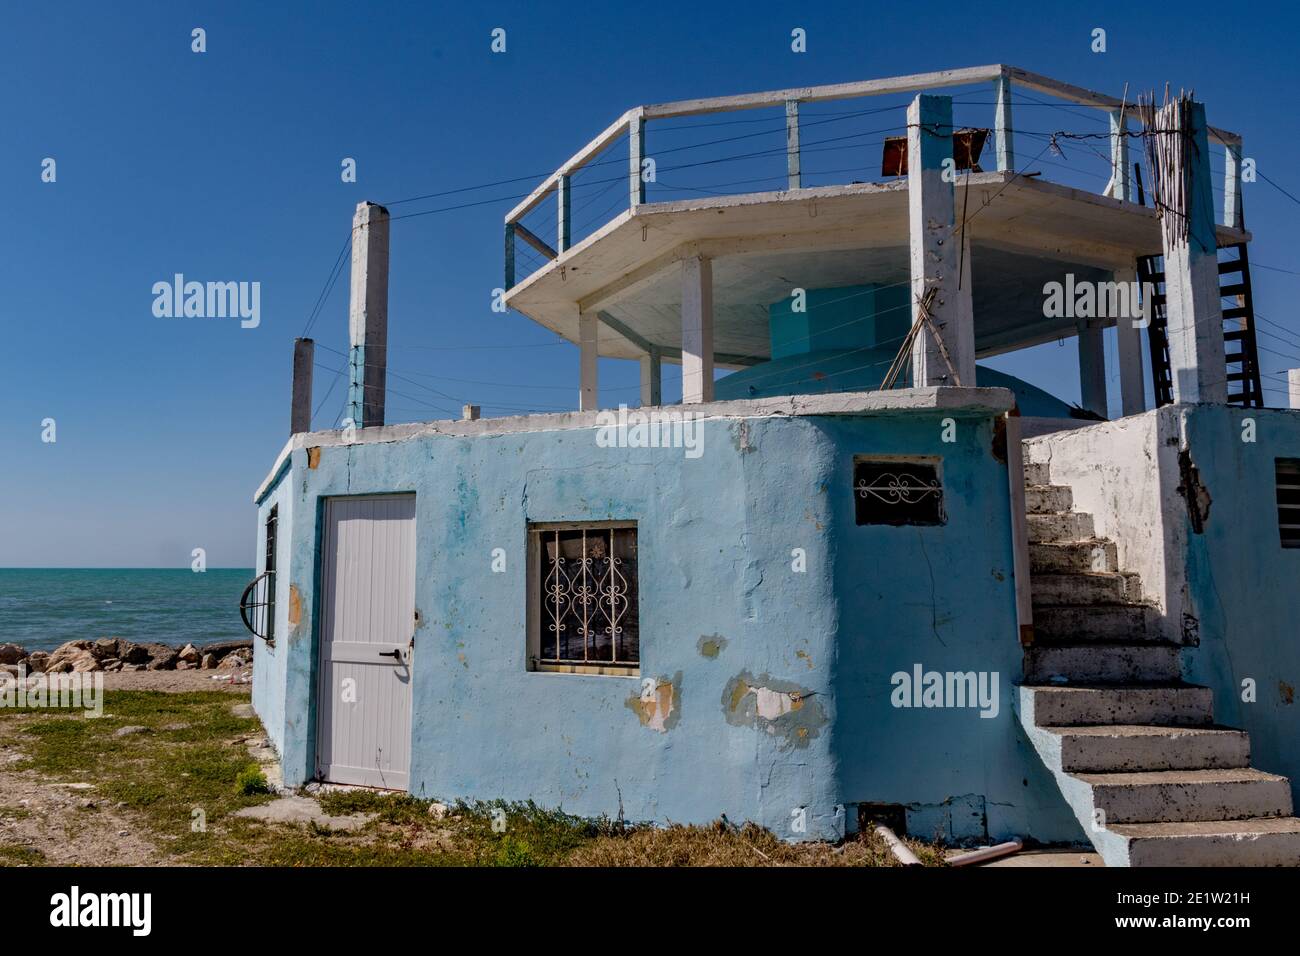 A nuclear shelter is repurposed into a summer pizza restaurant, Albania. Communist-era bunkers were built by dictator Enver Hoxha during the Cold War. Stock Photo